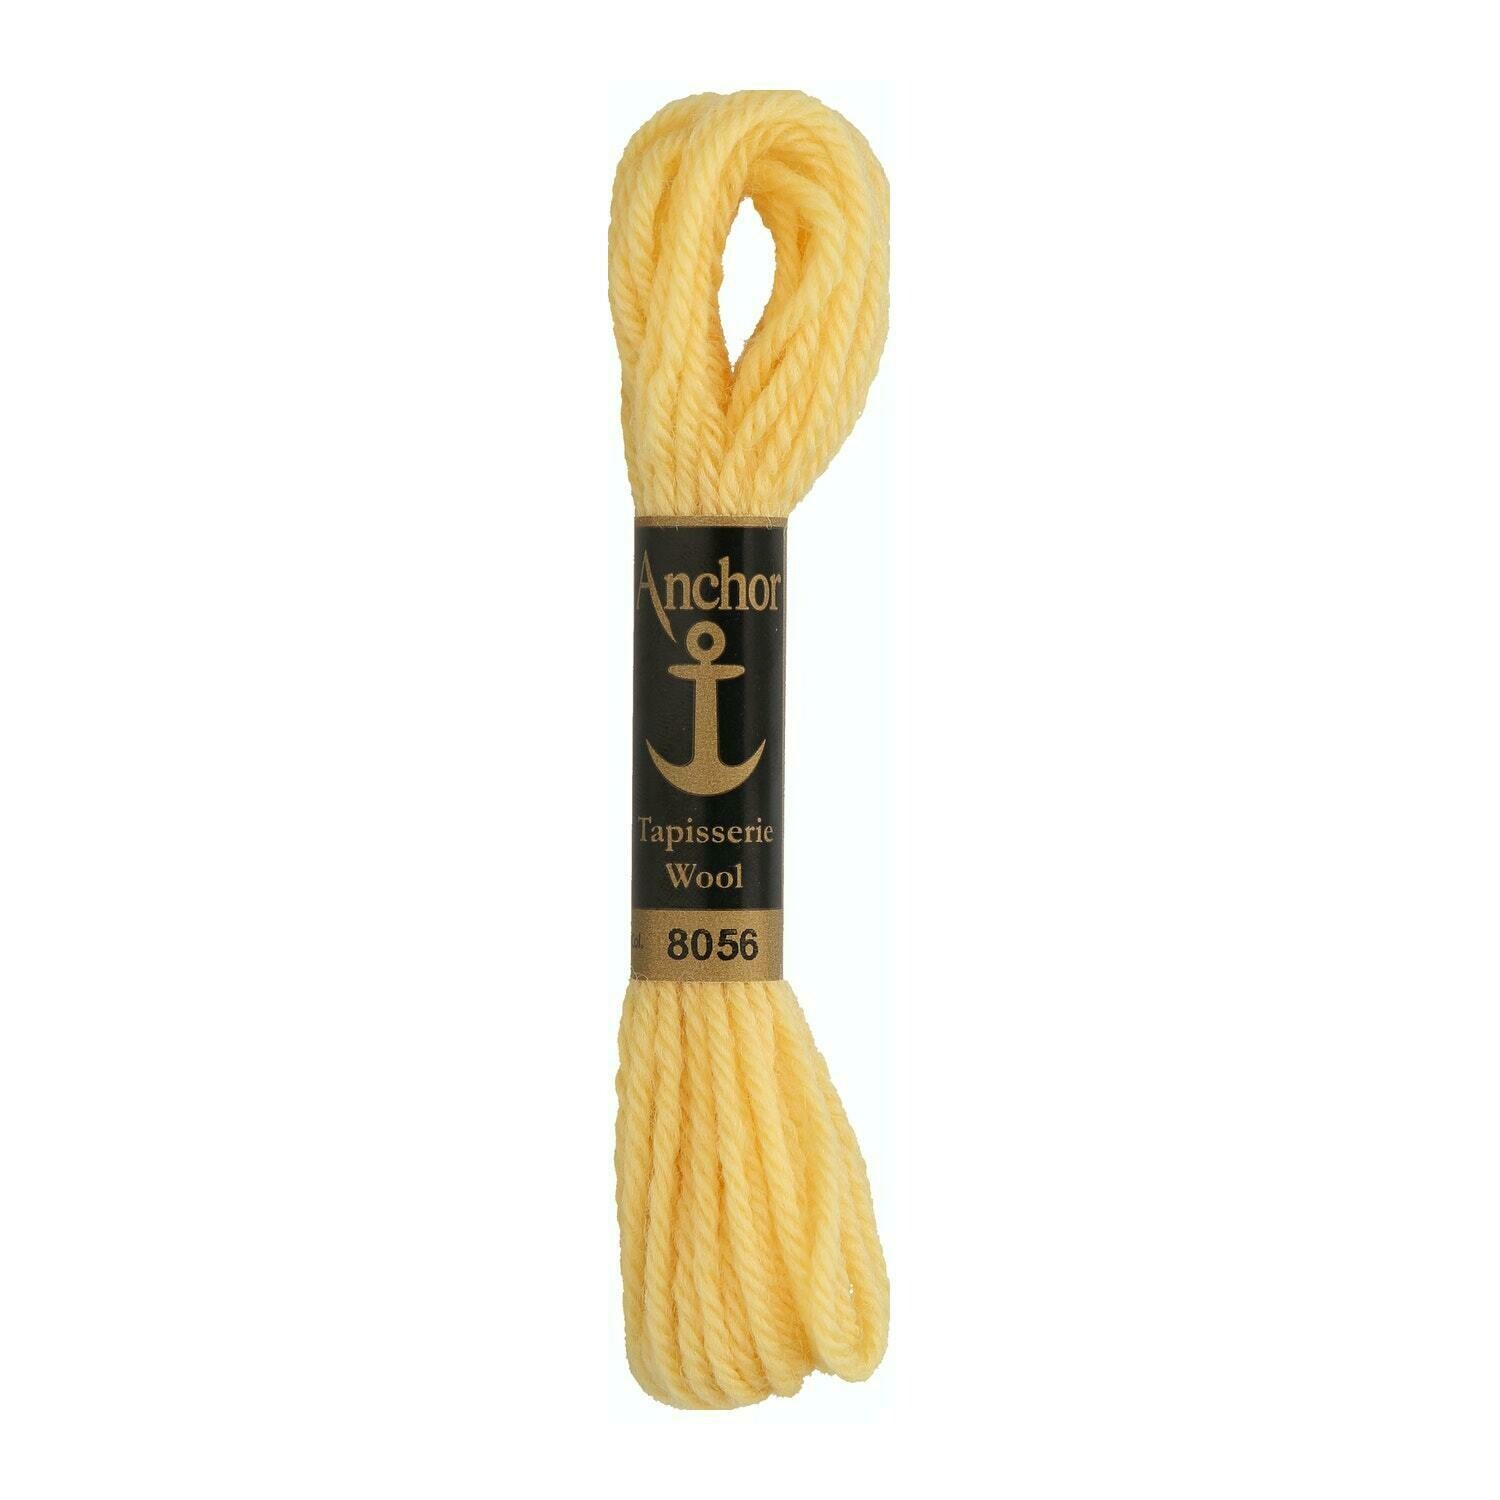 Anchor Tapisserie Wool #08056